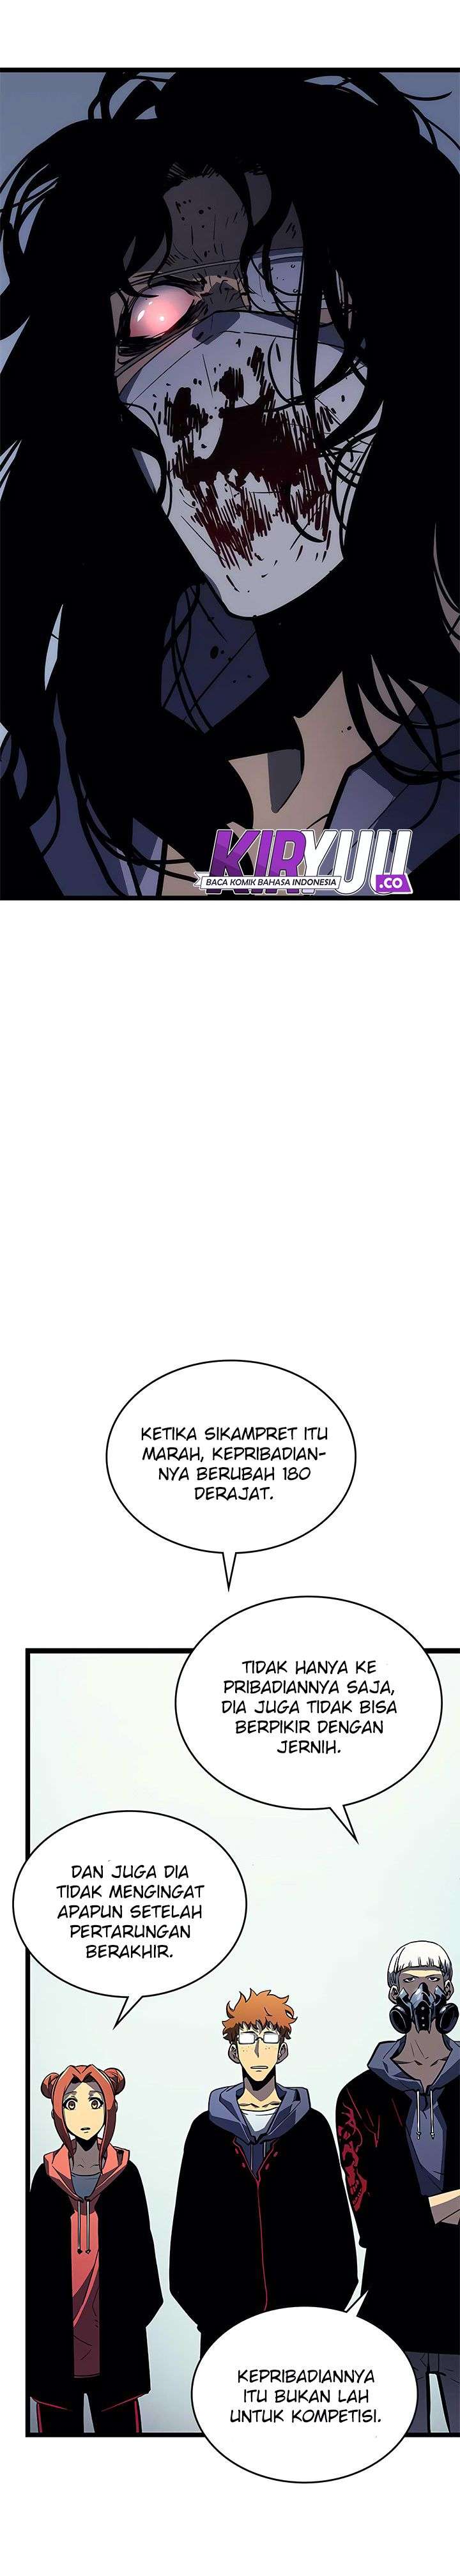 Solo Leveling Chapter 92 Image 22